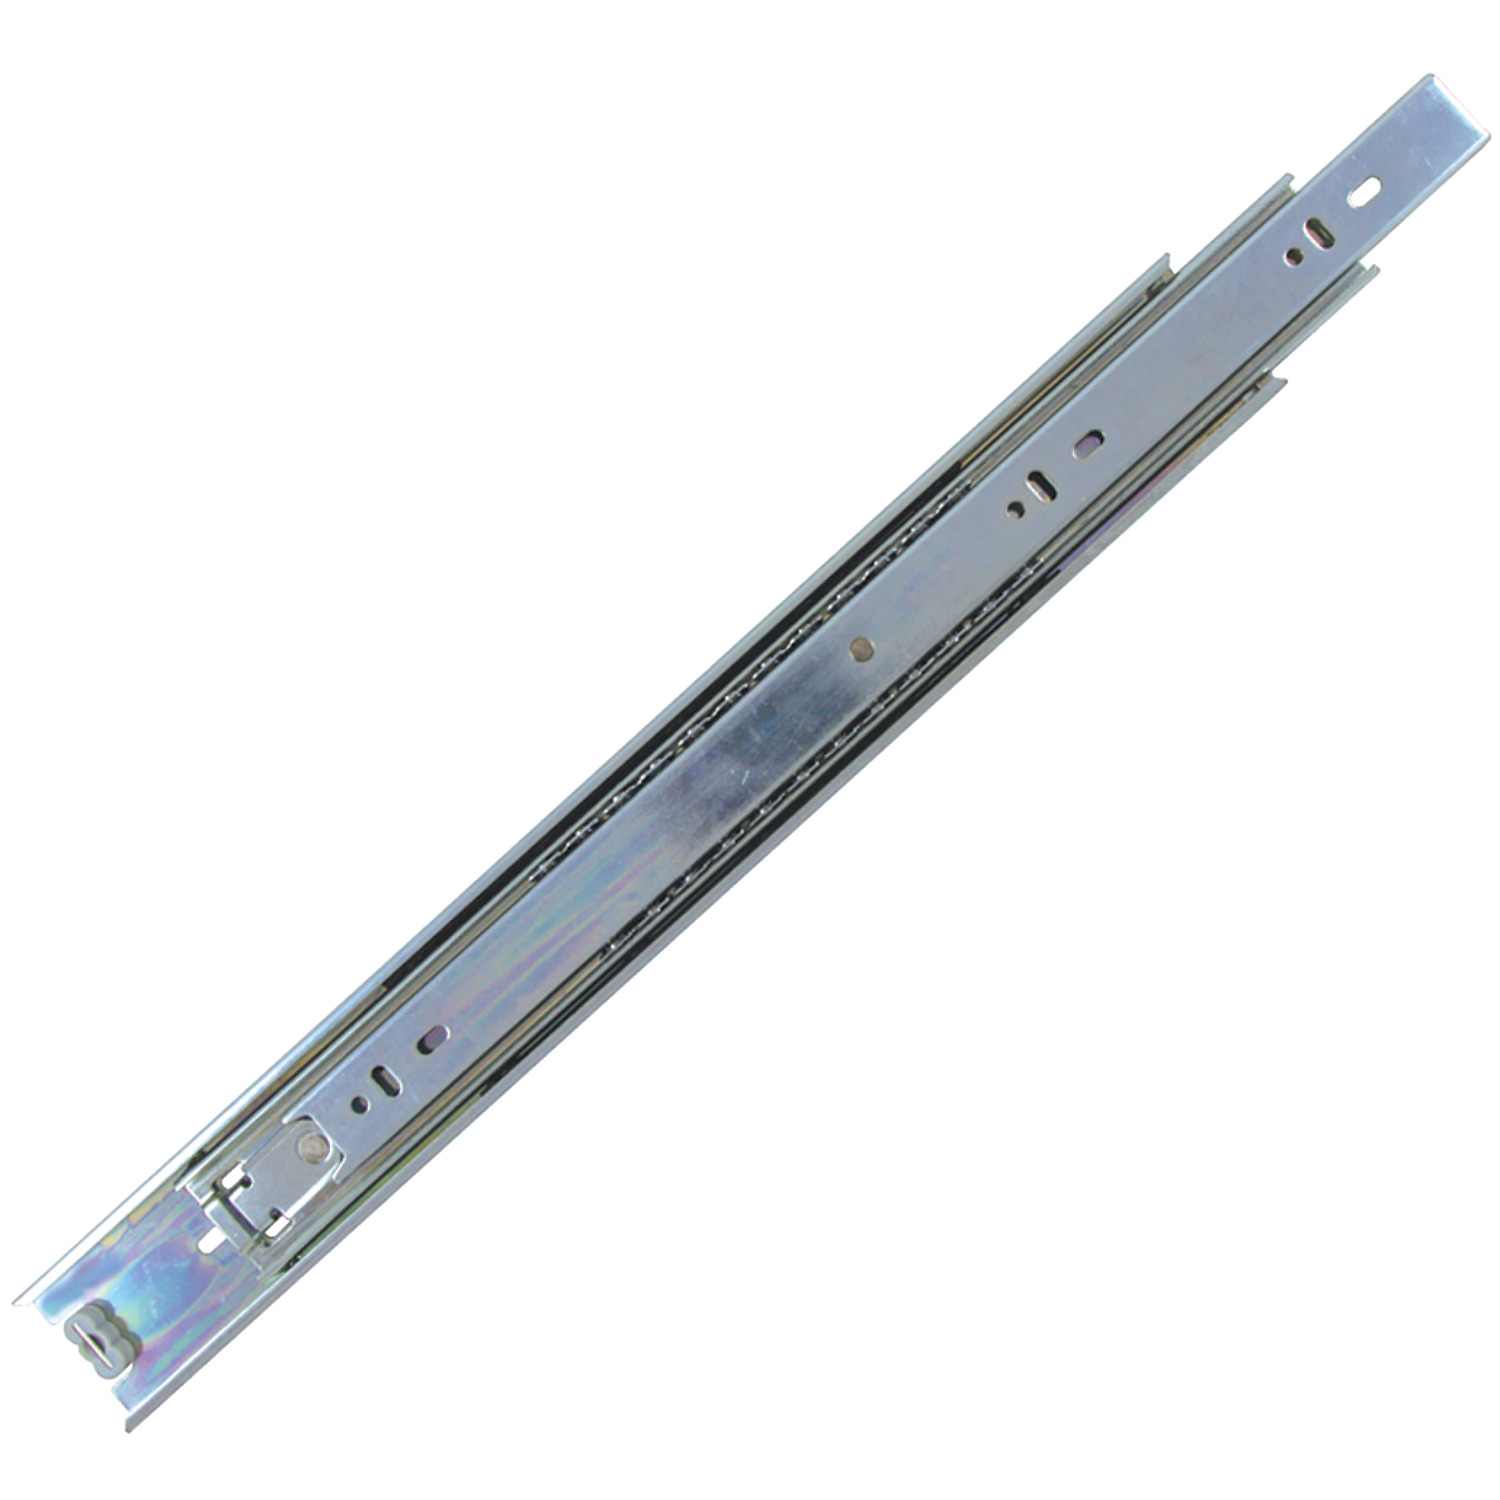 P5100.AC0250 Drawer Slide Full Extn Length 250; Load 45kg per pair. Sold Individually. Lever Disconnect; Positive Lock